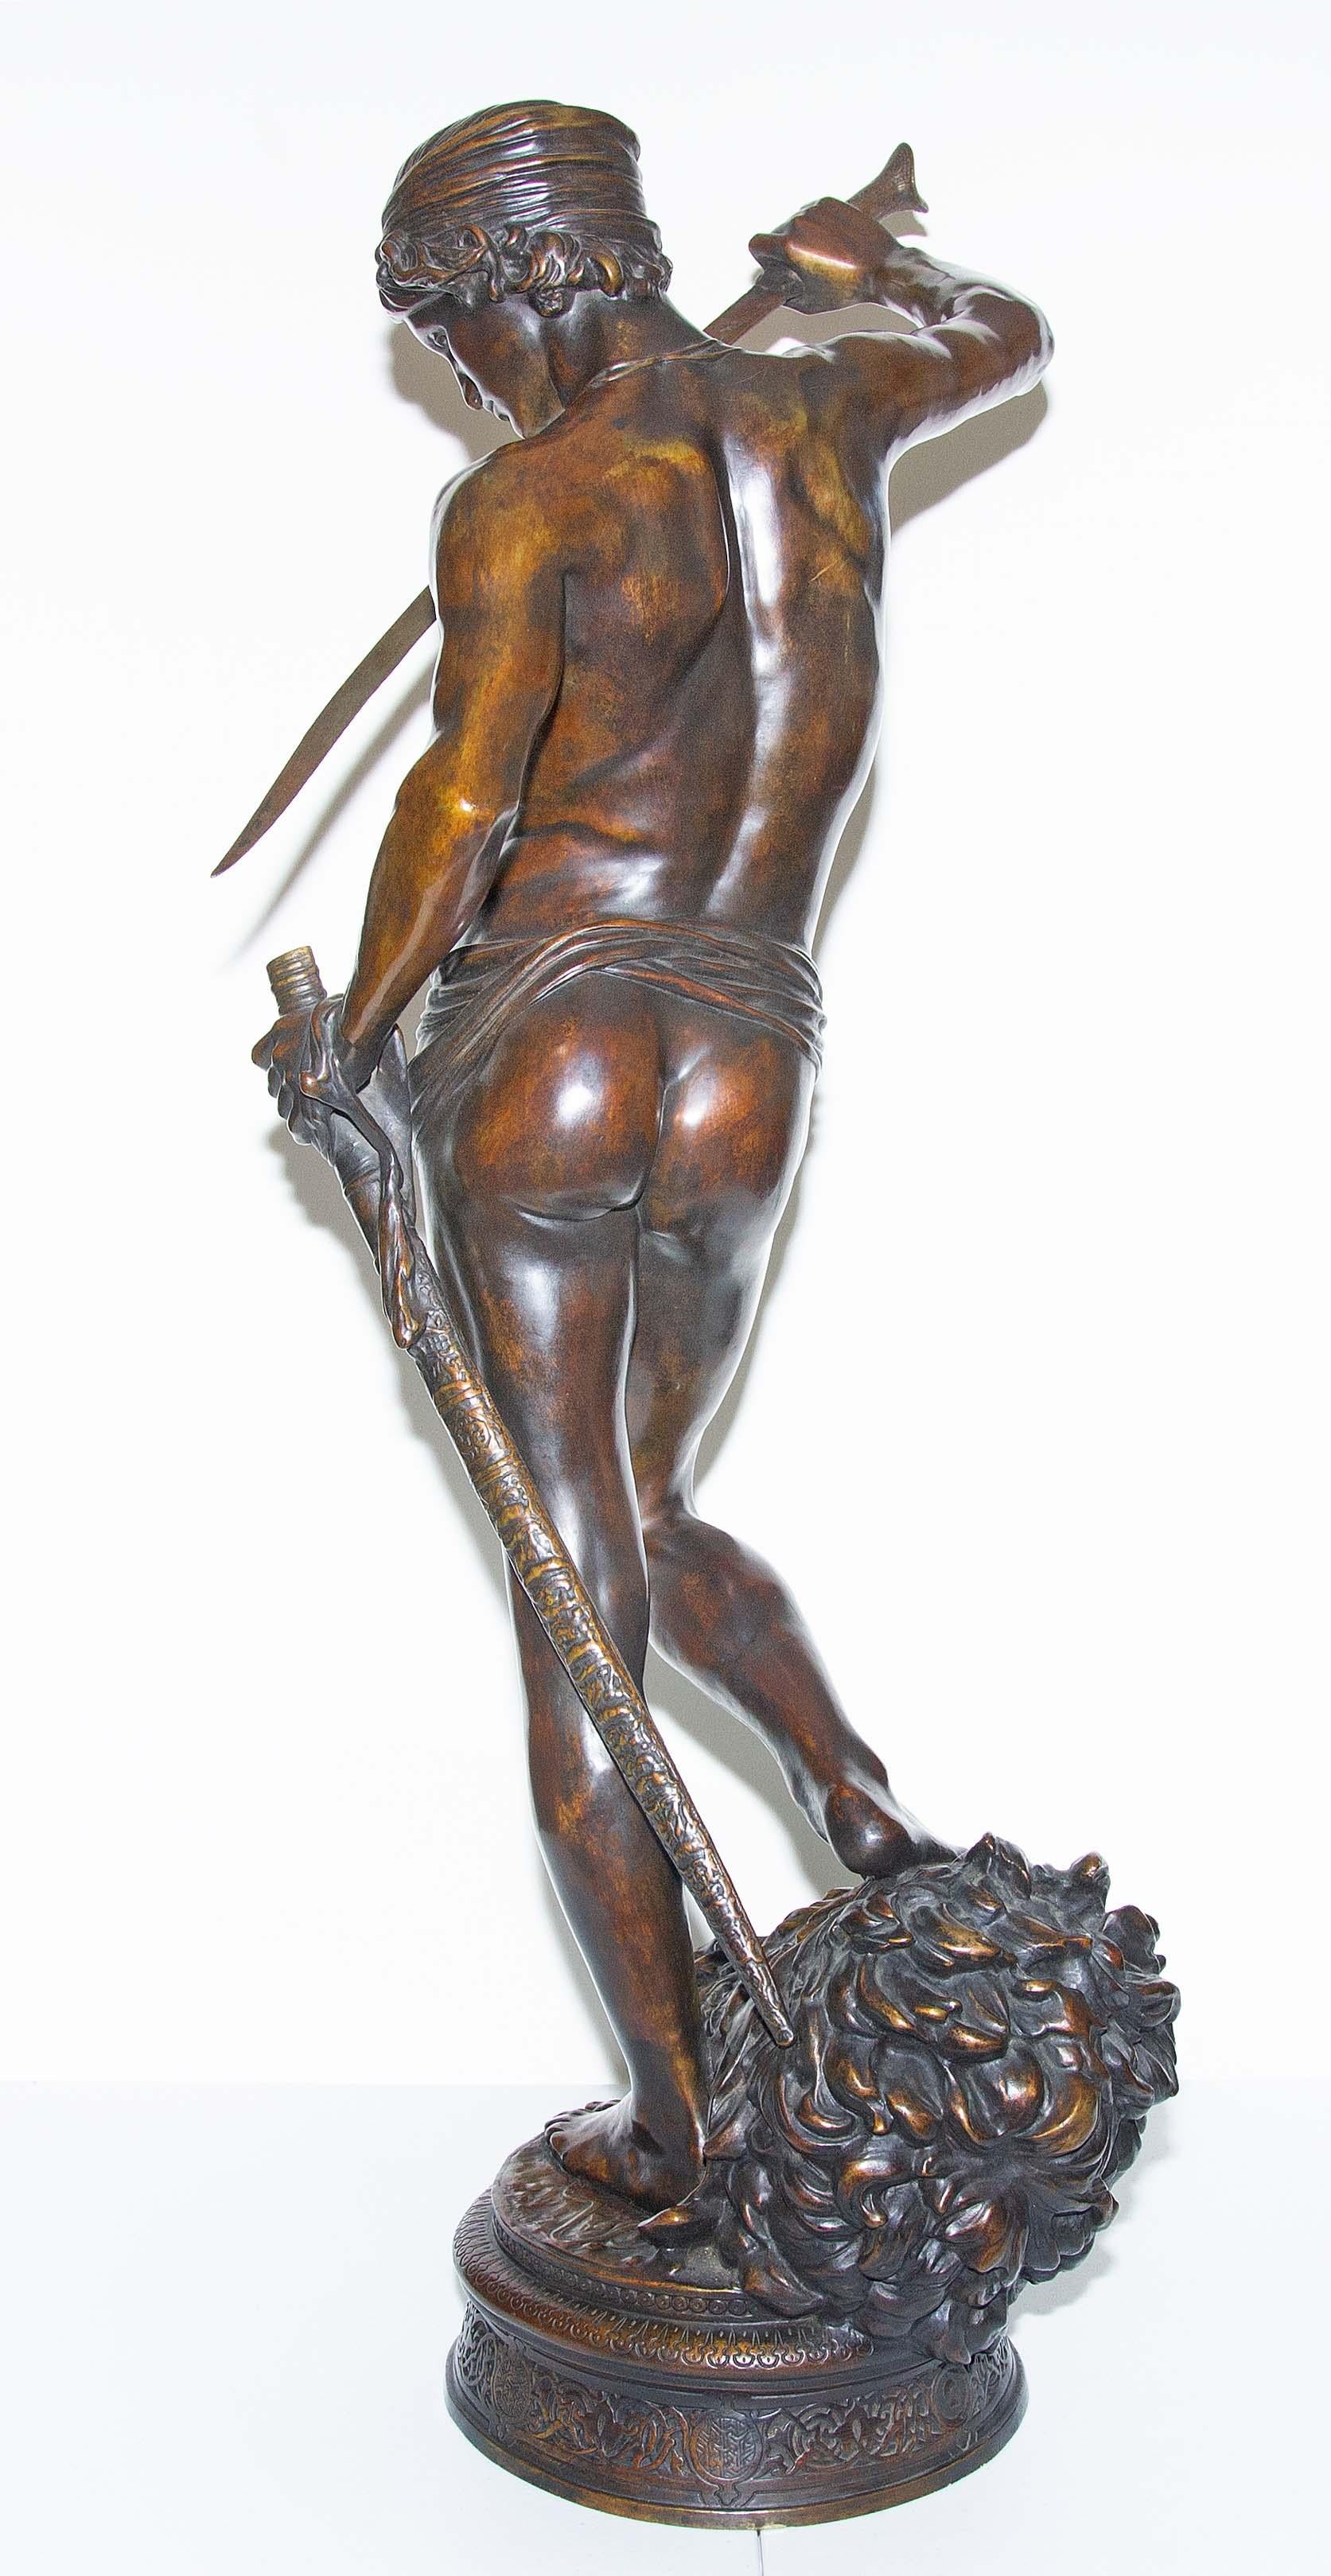 Fine French orientalist bronze statue of David after the battle with Goliath by Antonin Mercie. This subject received the Medal of Honour when it was shown at the Paris Salon des Beaux Arts. Late 19th century. 42